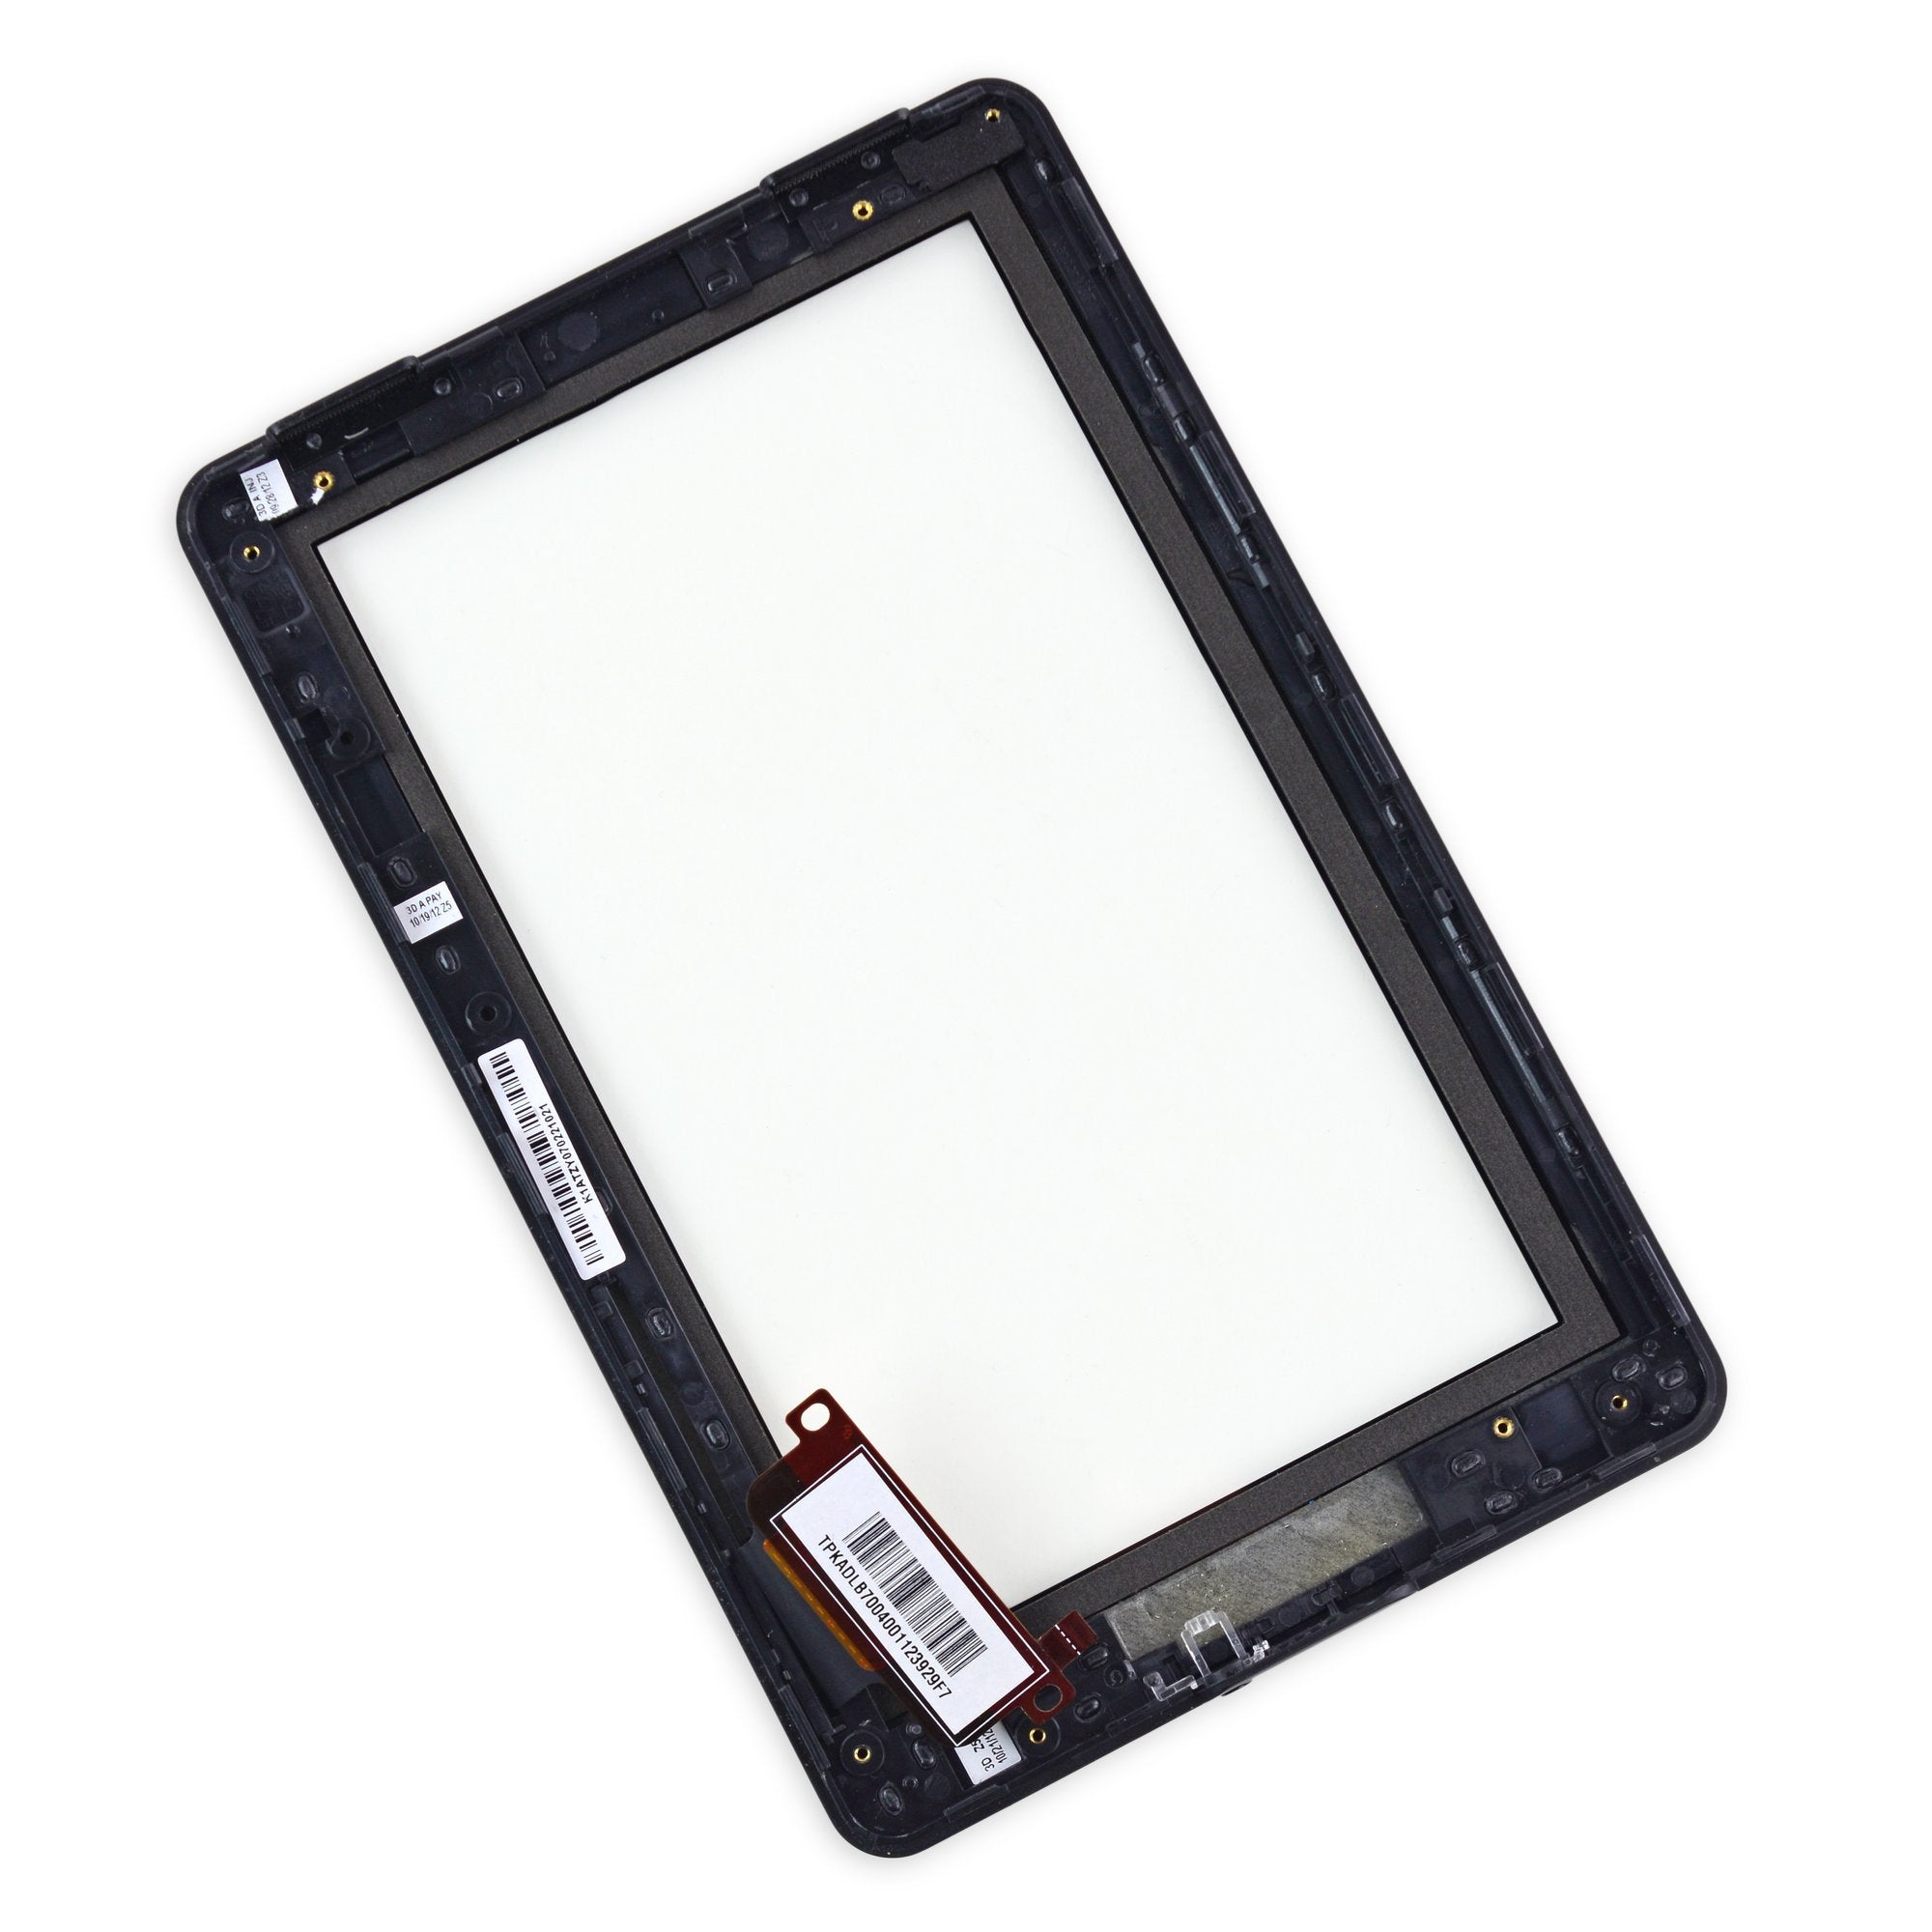 Kindle Fire (2012, 2nd Gen) Front Panel Assembly